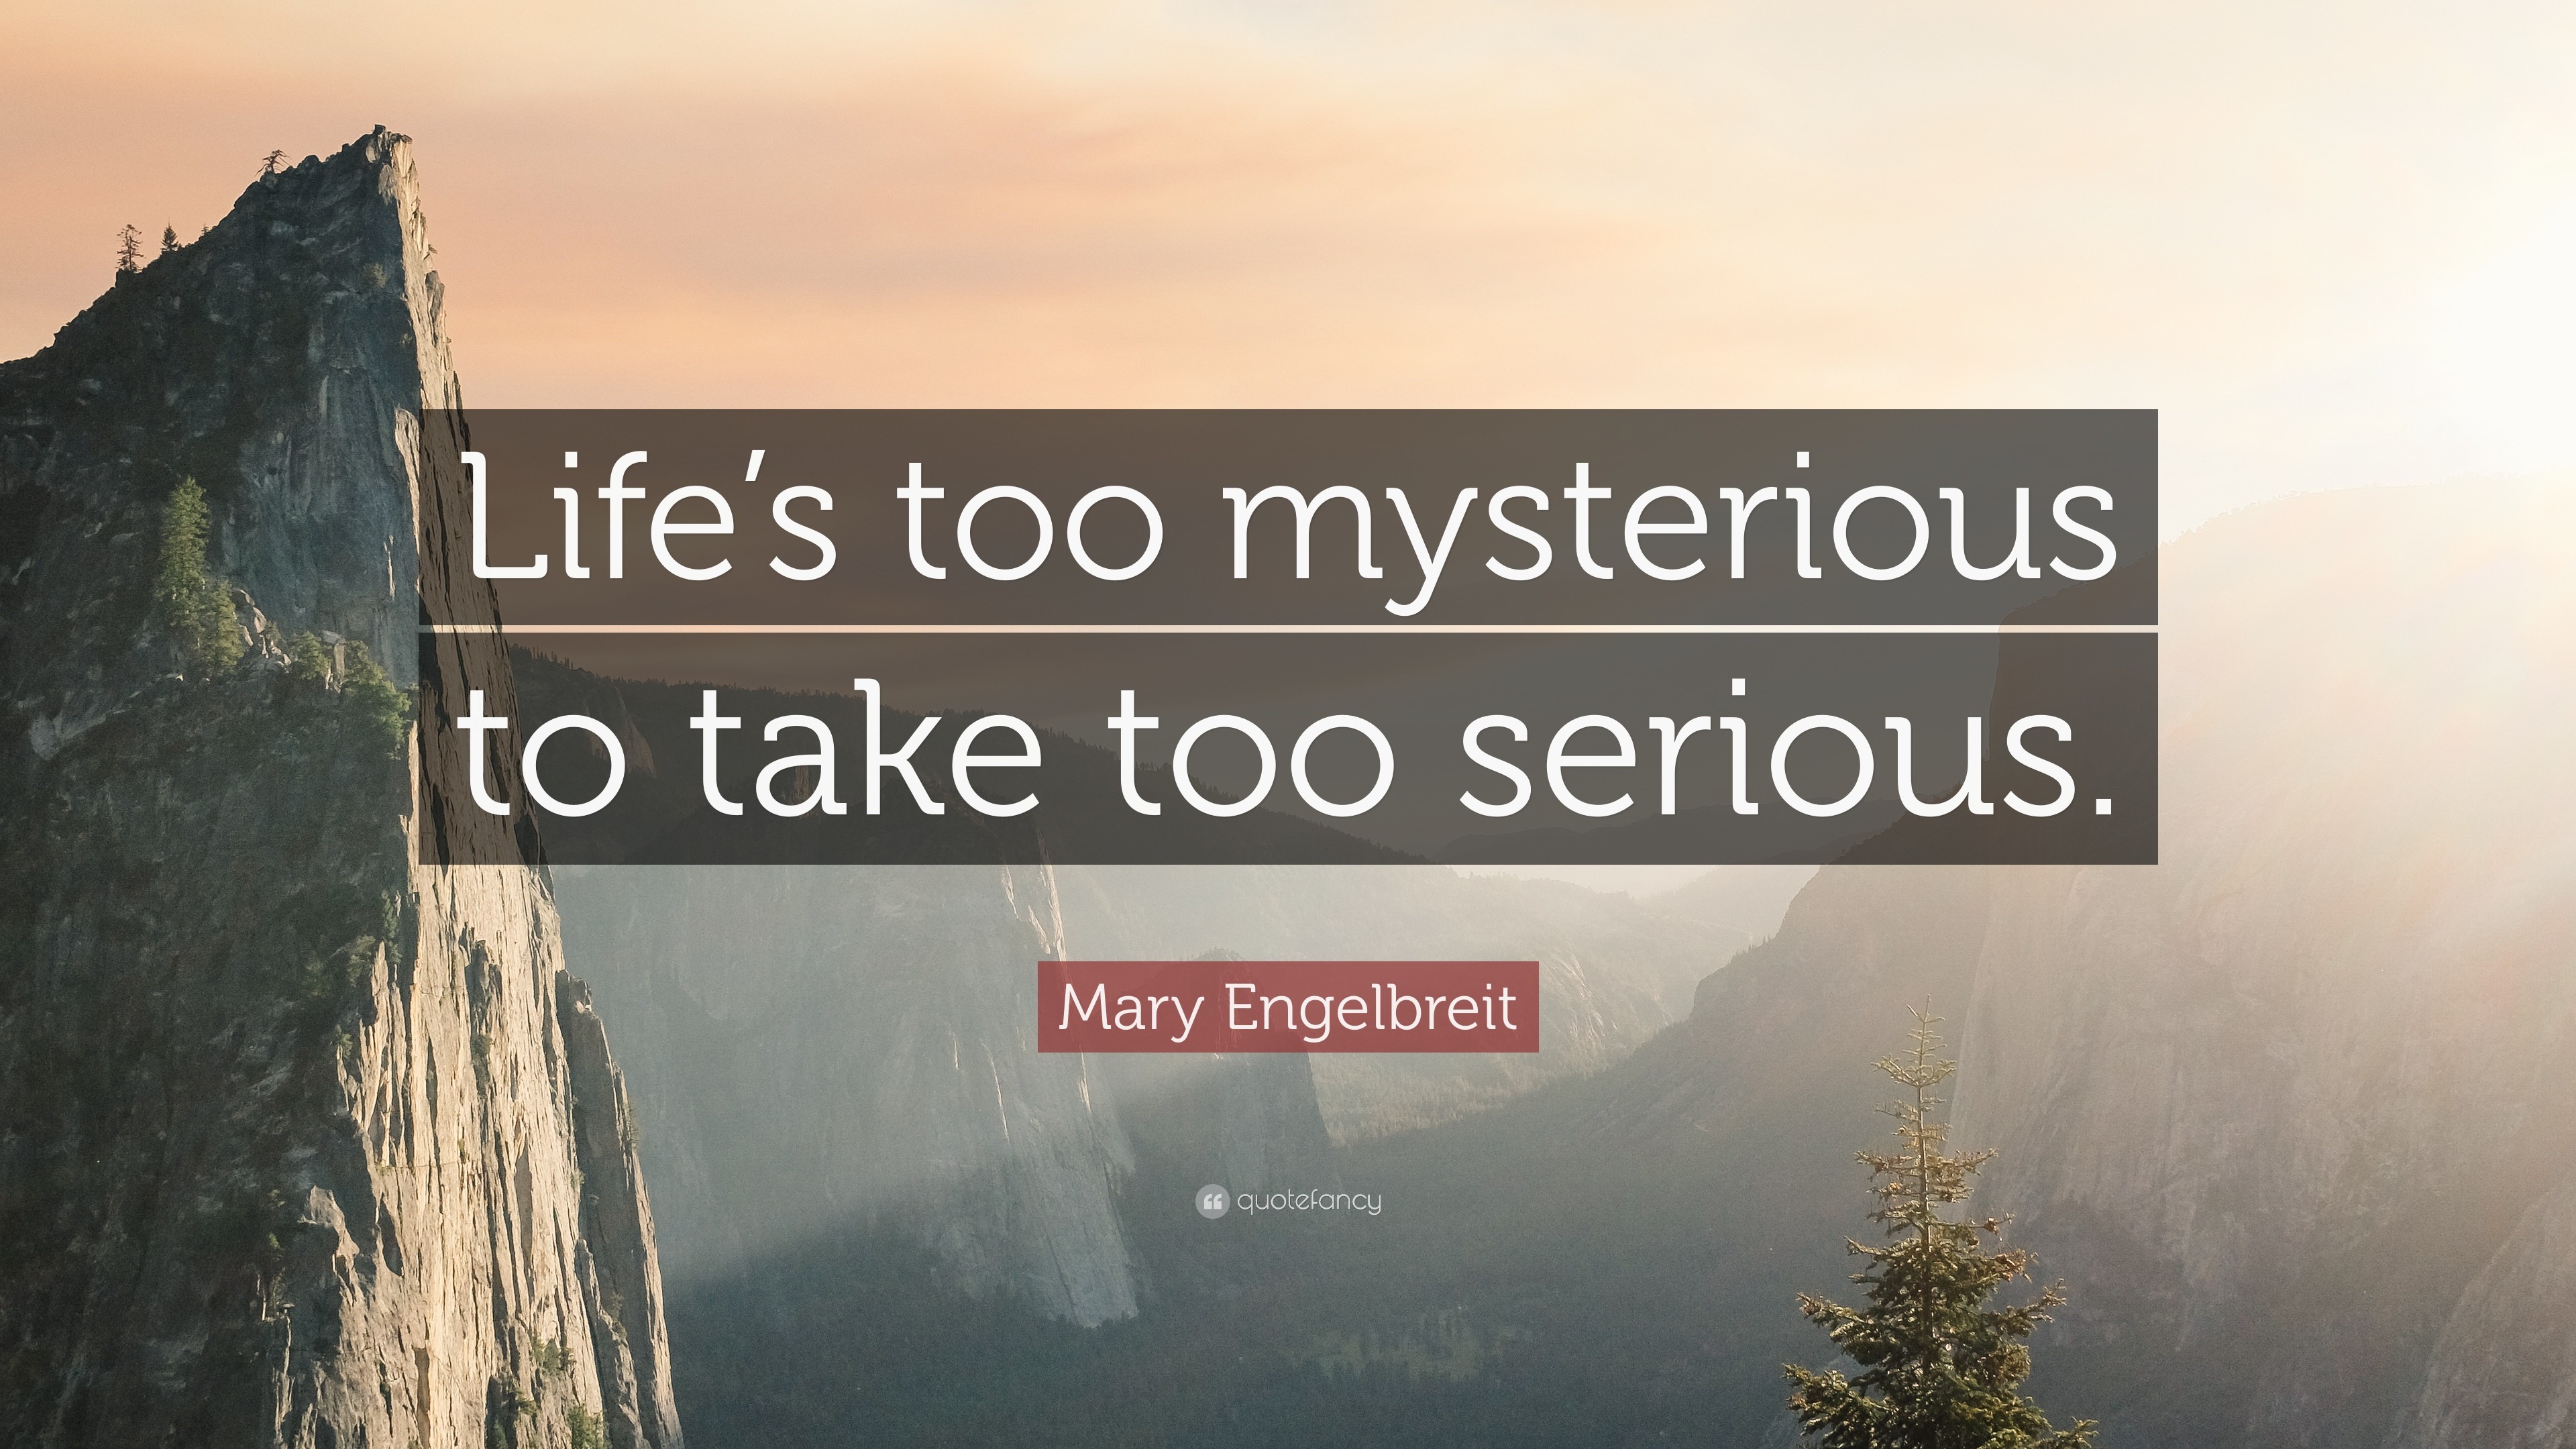 Mary Engelbreit Quote Lifes too mysterious to take too serious.